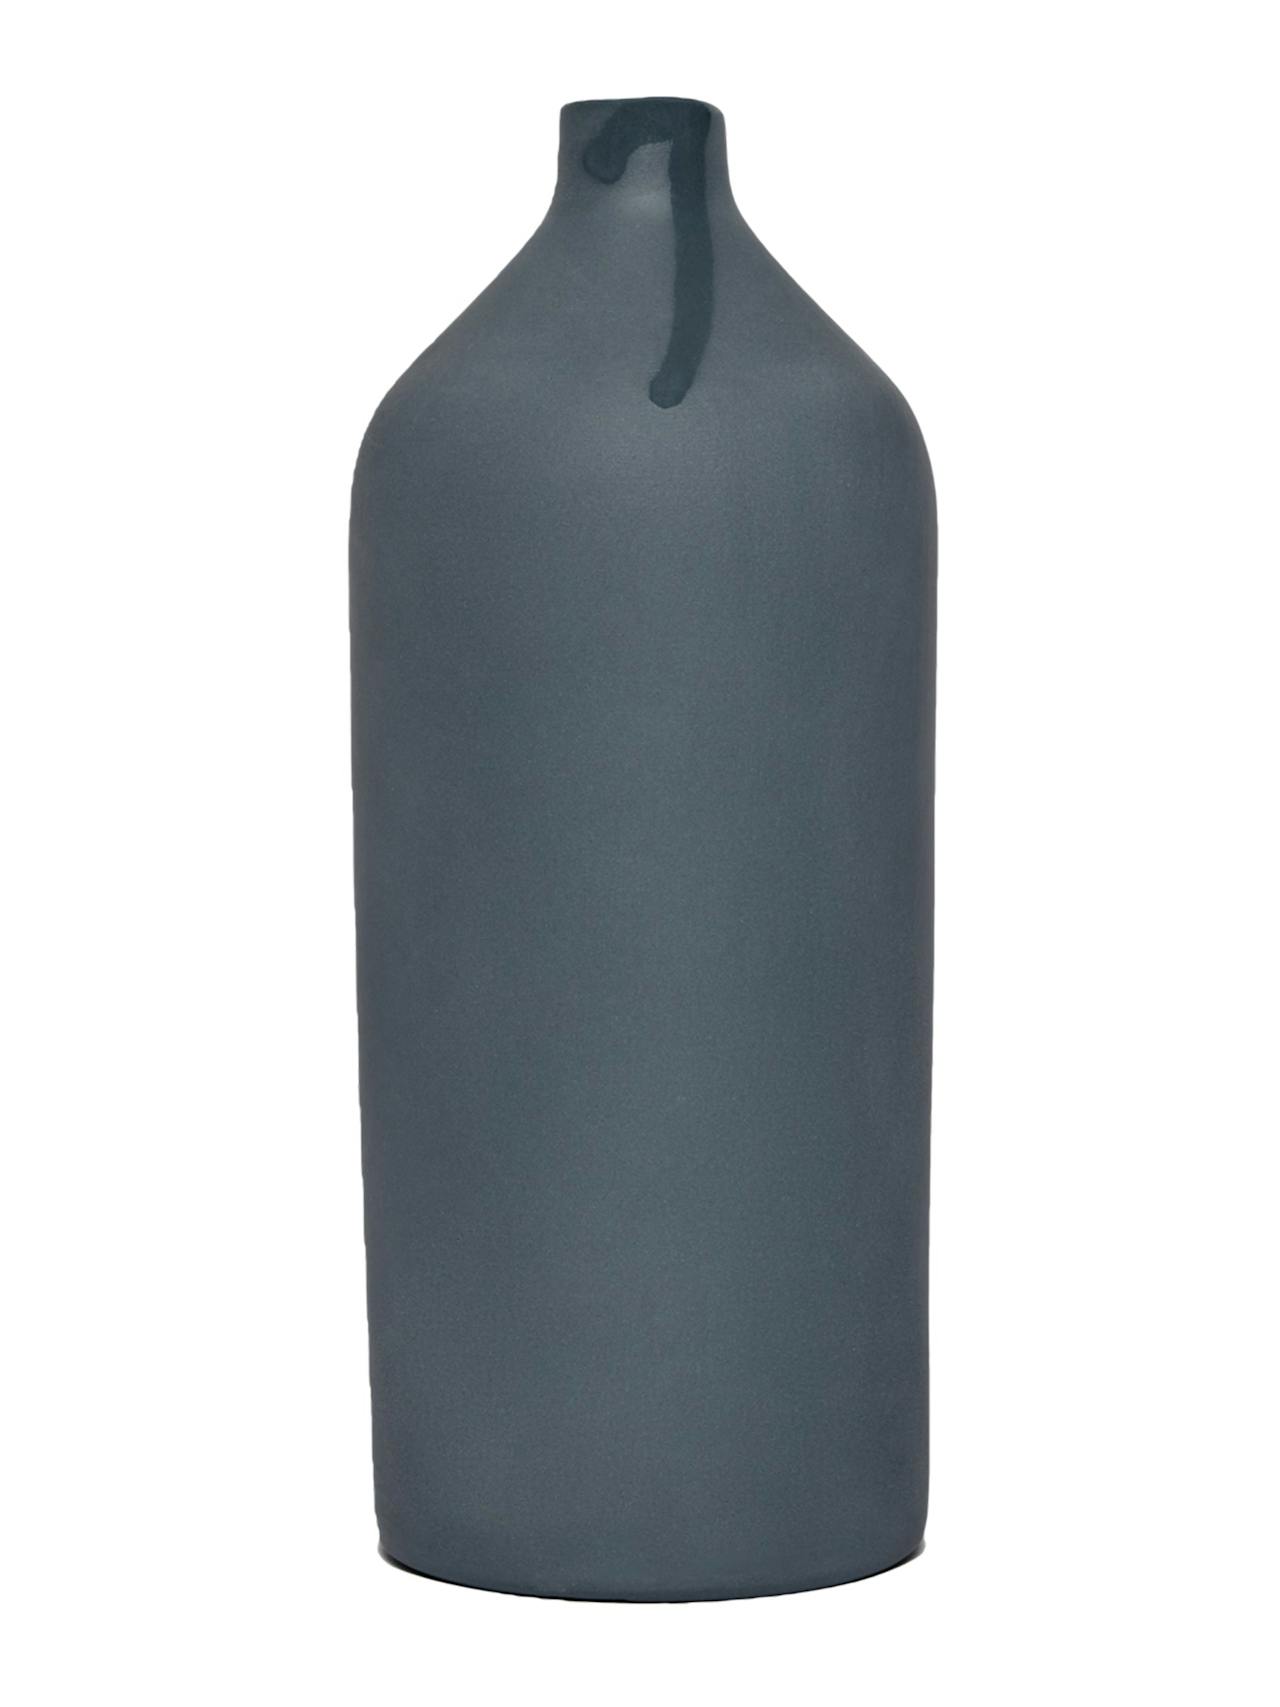 Sleek and sophisticated, this The Sette matte vase comes in the perfect shade of storm grey. Collagerie.com